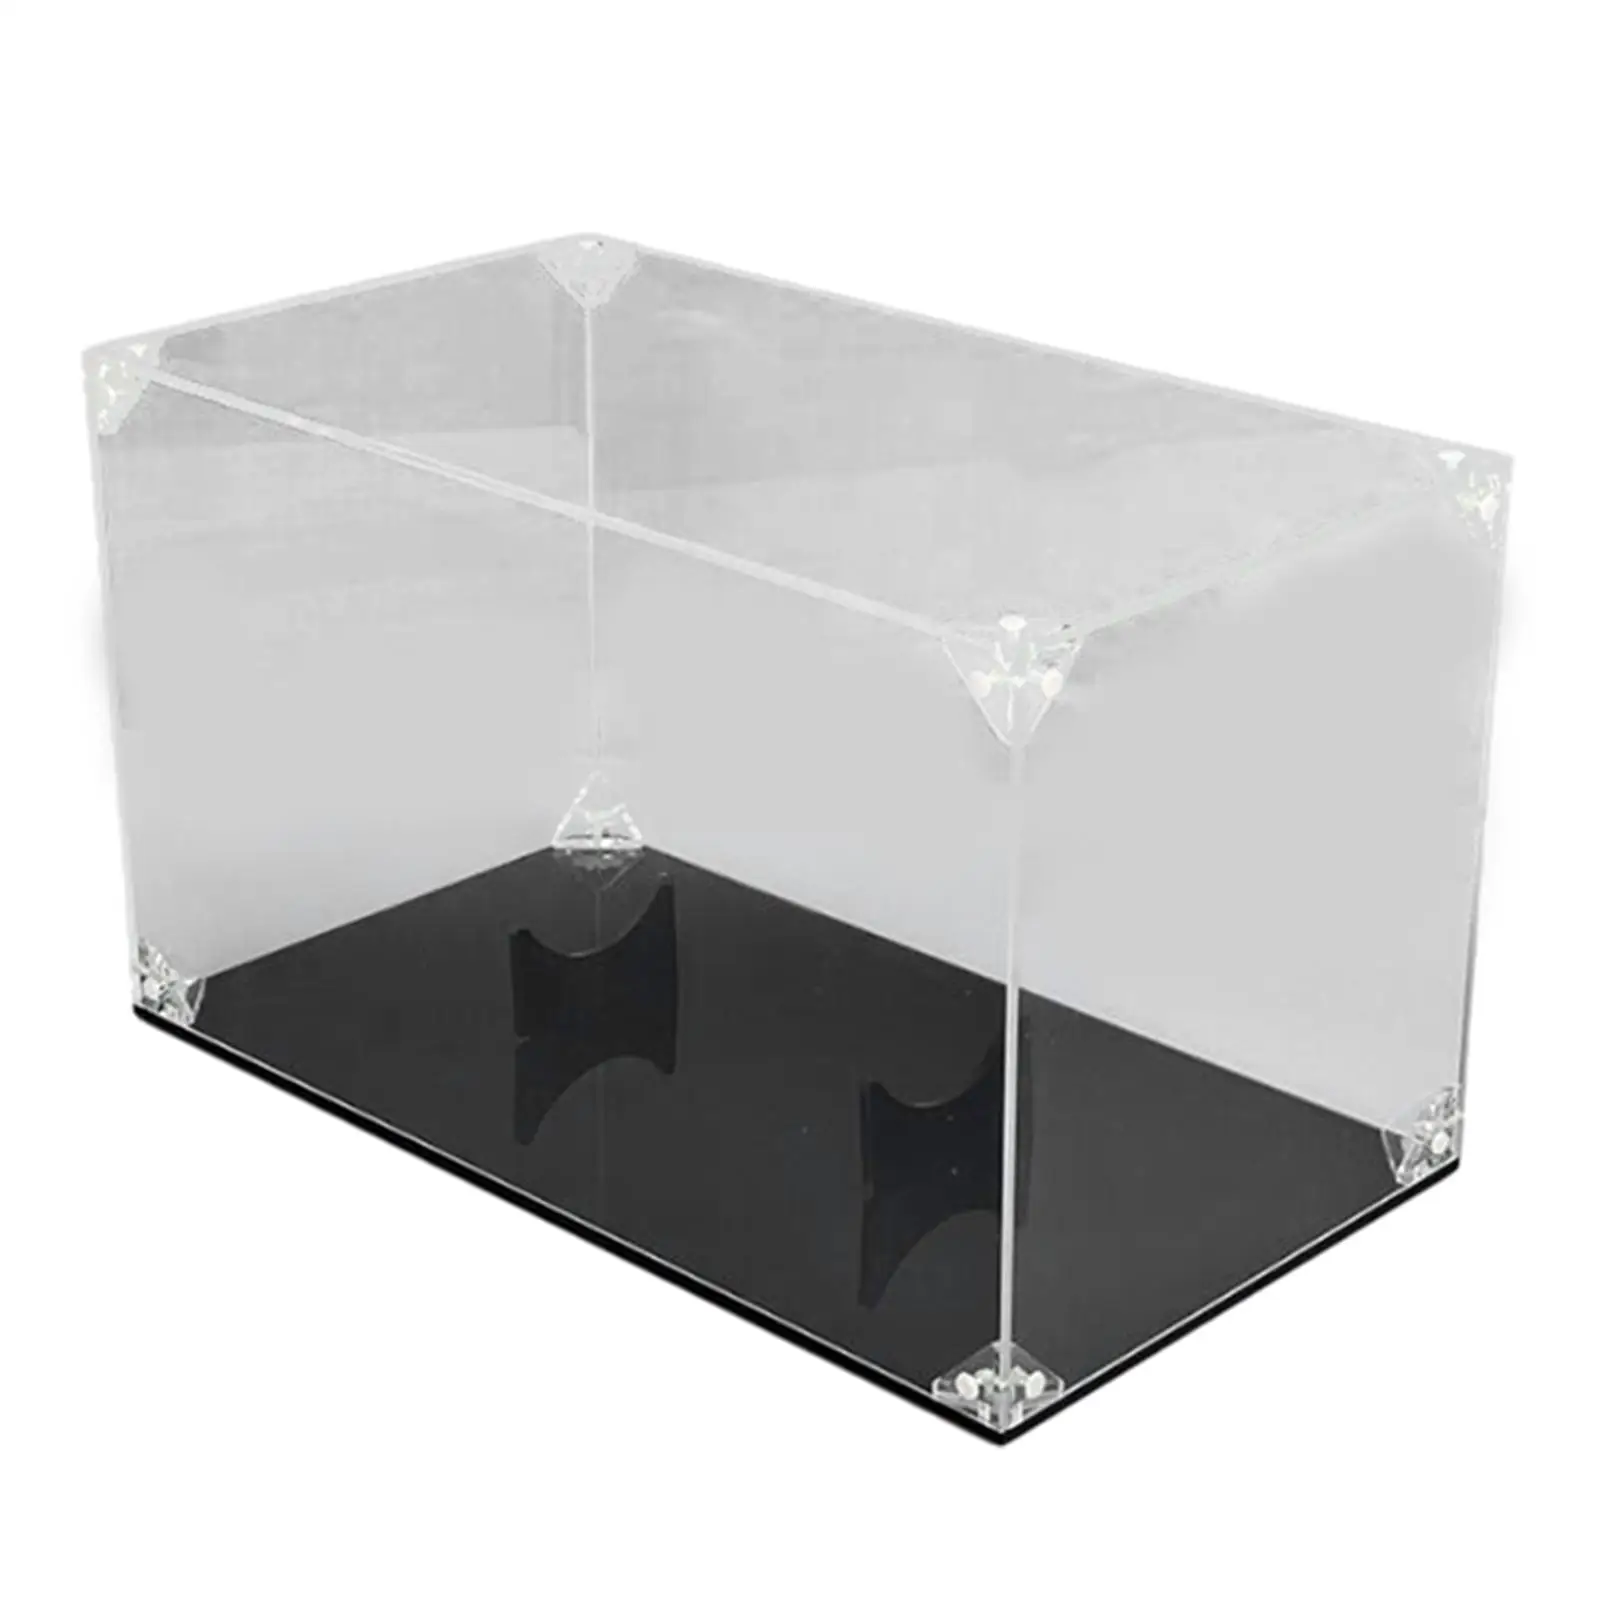 Clear Acrylic Football Display Case Oval Ball Holder Rugby Holder Sports Collectibles Storage Showcase Box Football Storage Rack